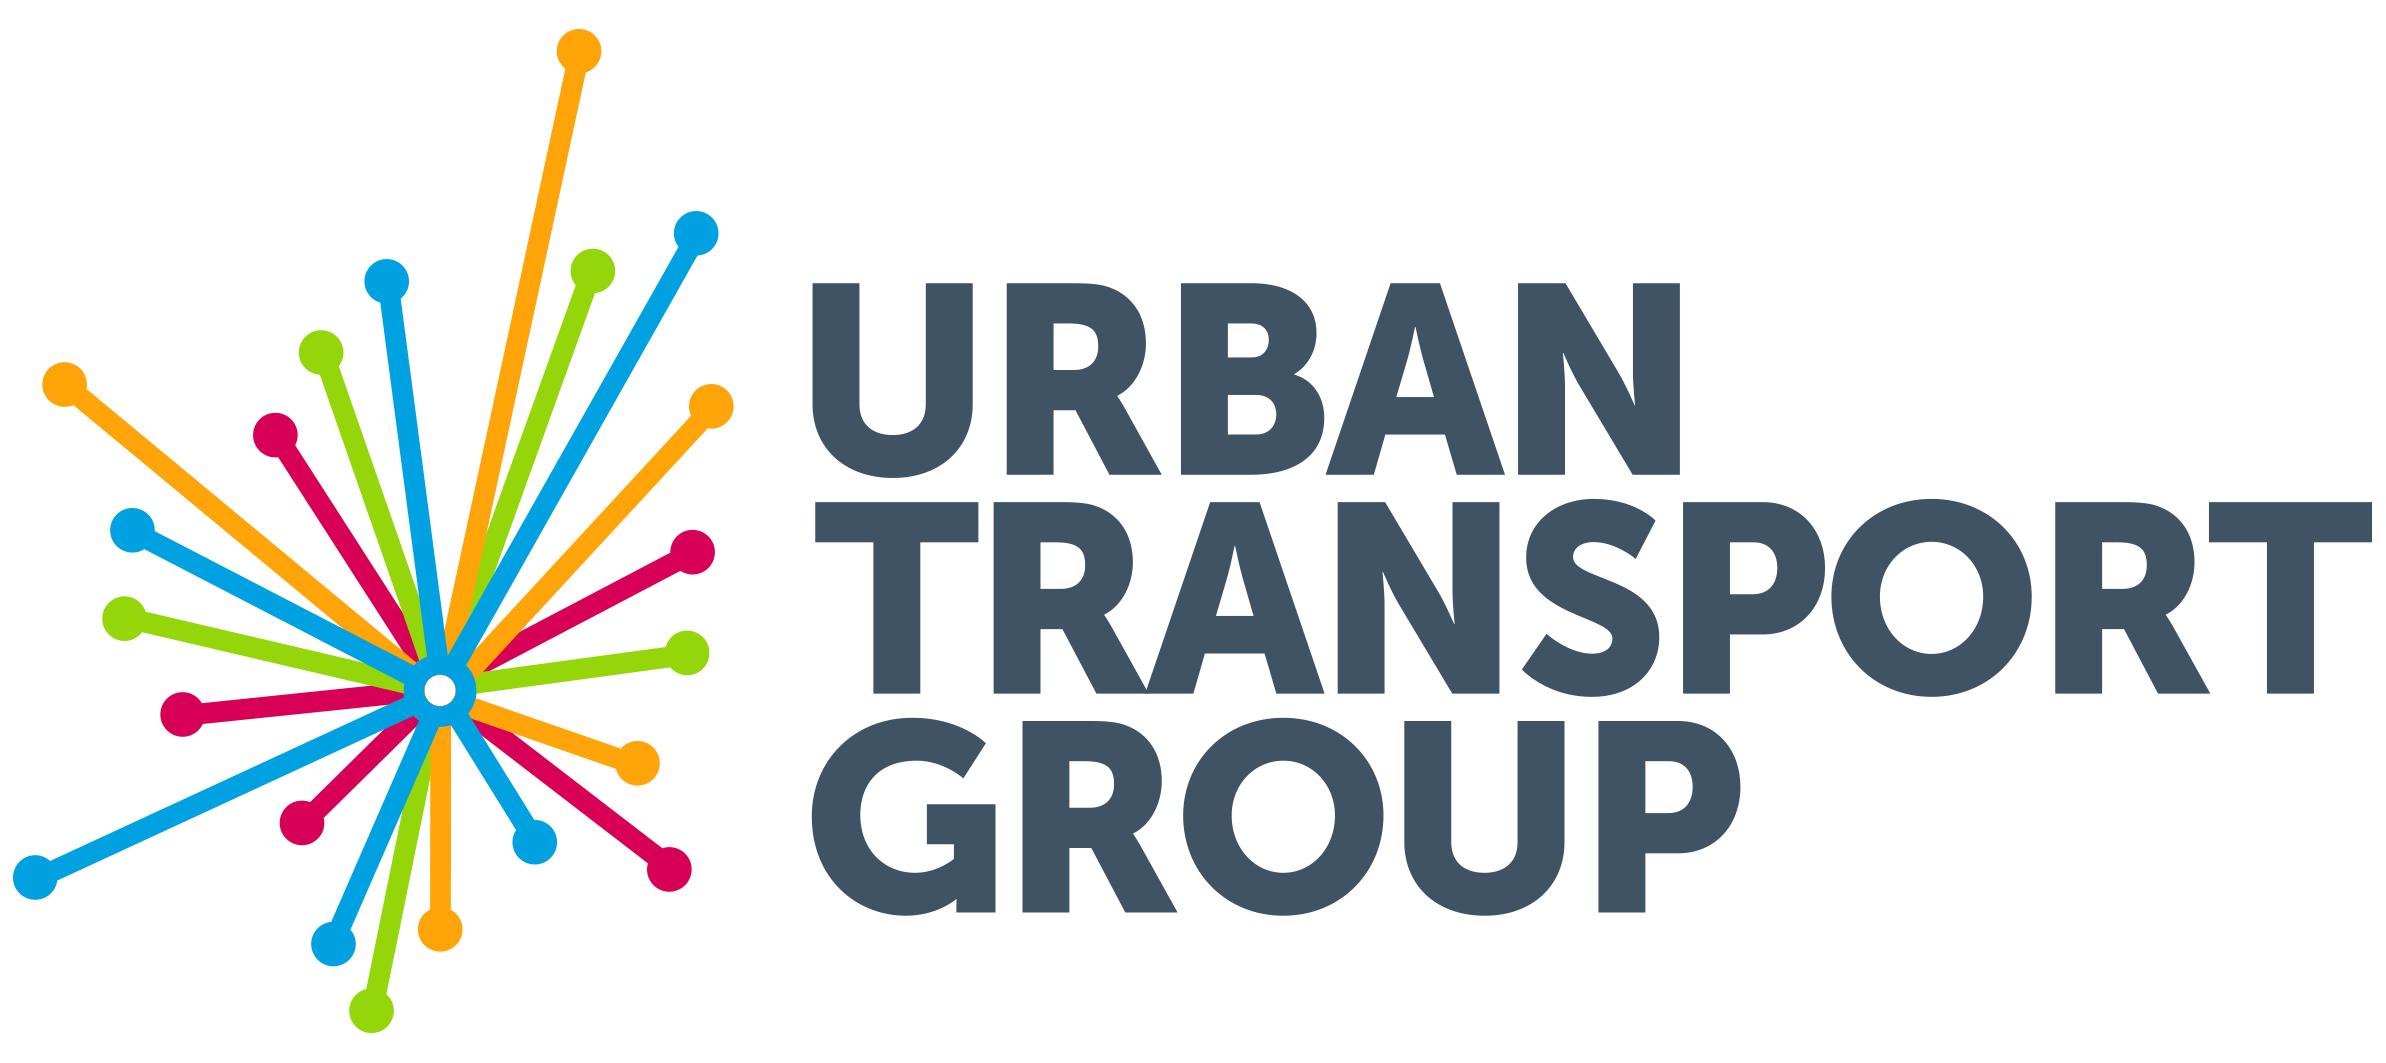 The Urban Transport Group was appointed the Secretariat for the review, lending administration and technical support